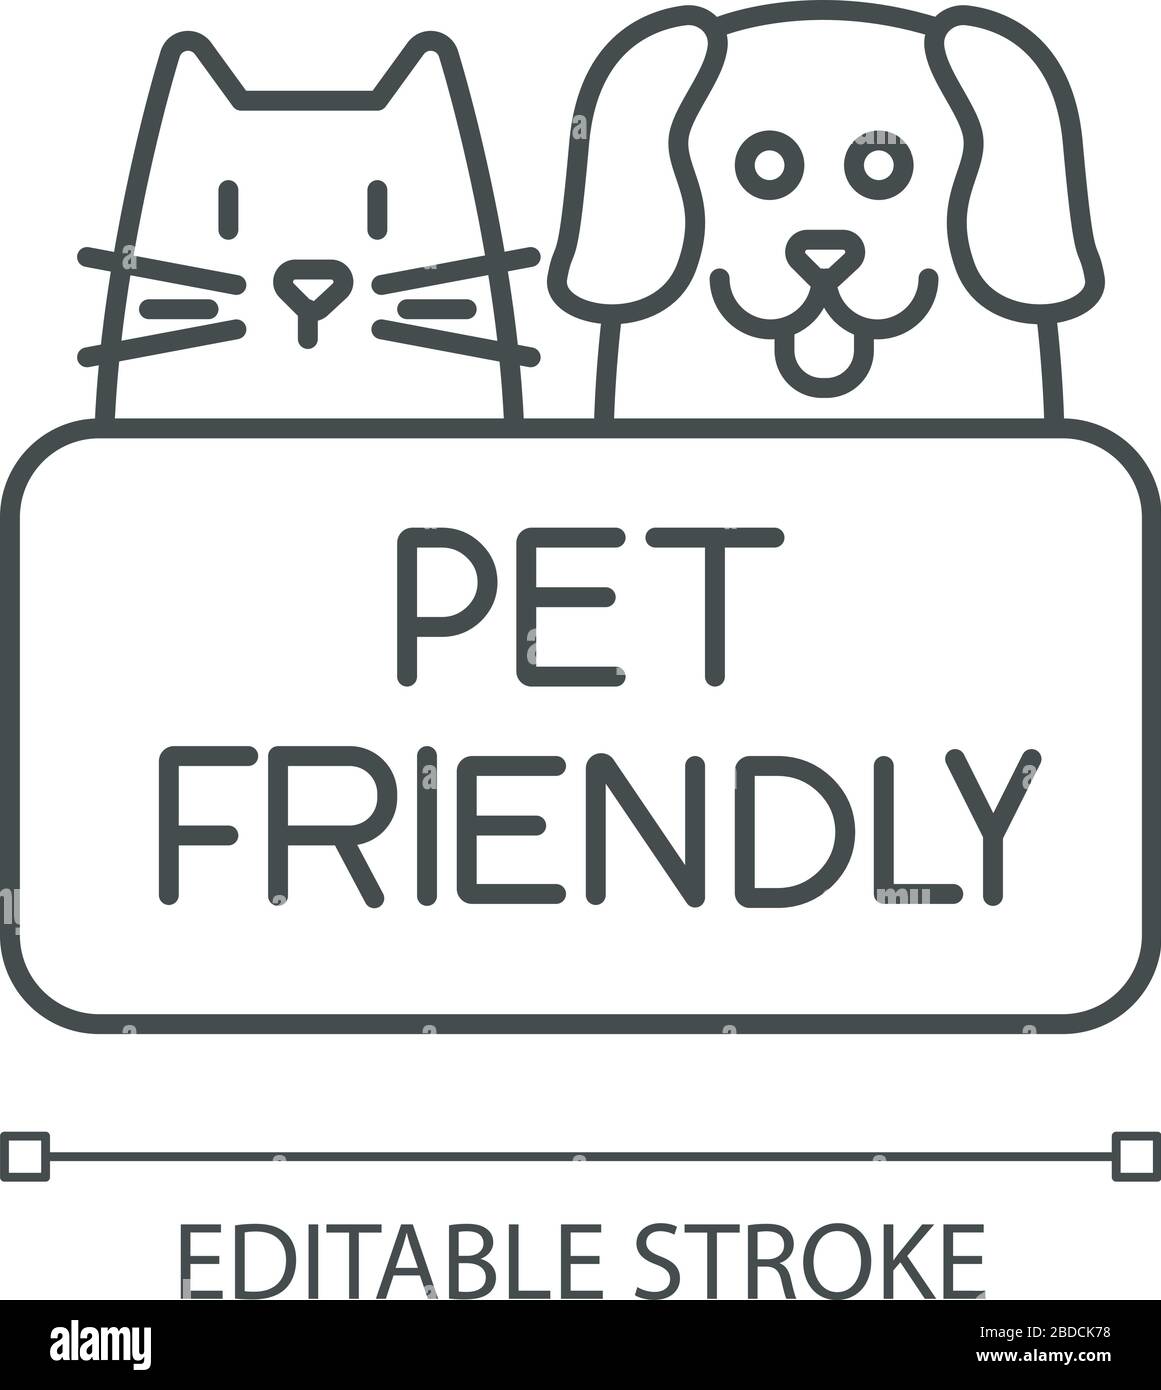 Cat and dog friendly area pixel perfect linear icon. Puppy and kitten permitted, pets welcome. Thin line customizable illustration. Contour symbol Stock Vector